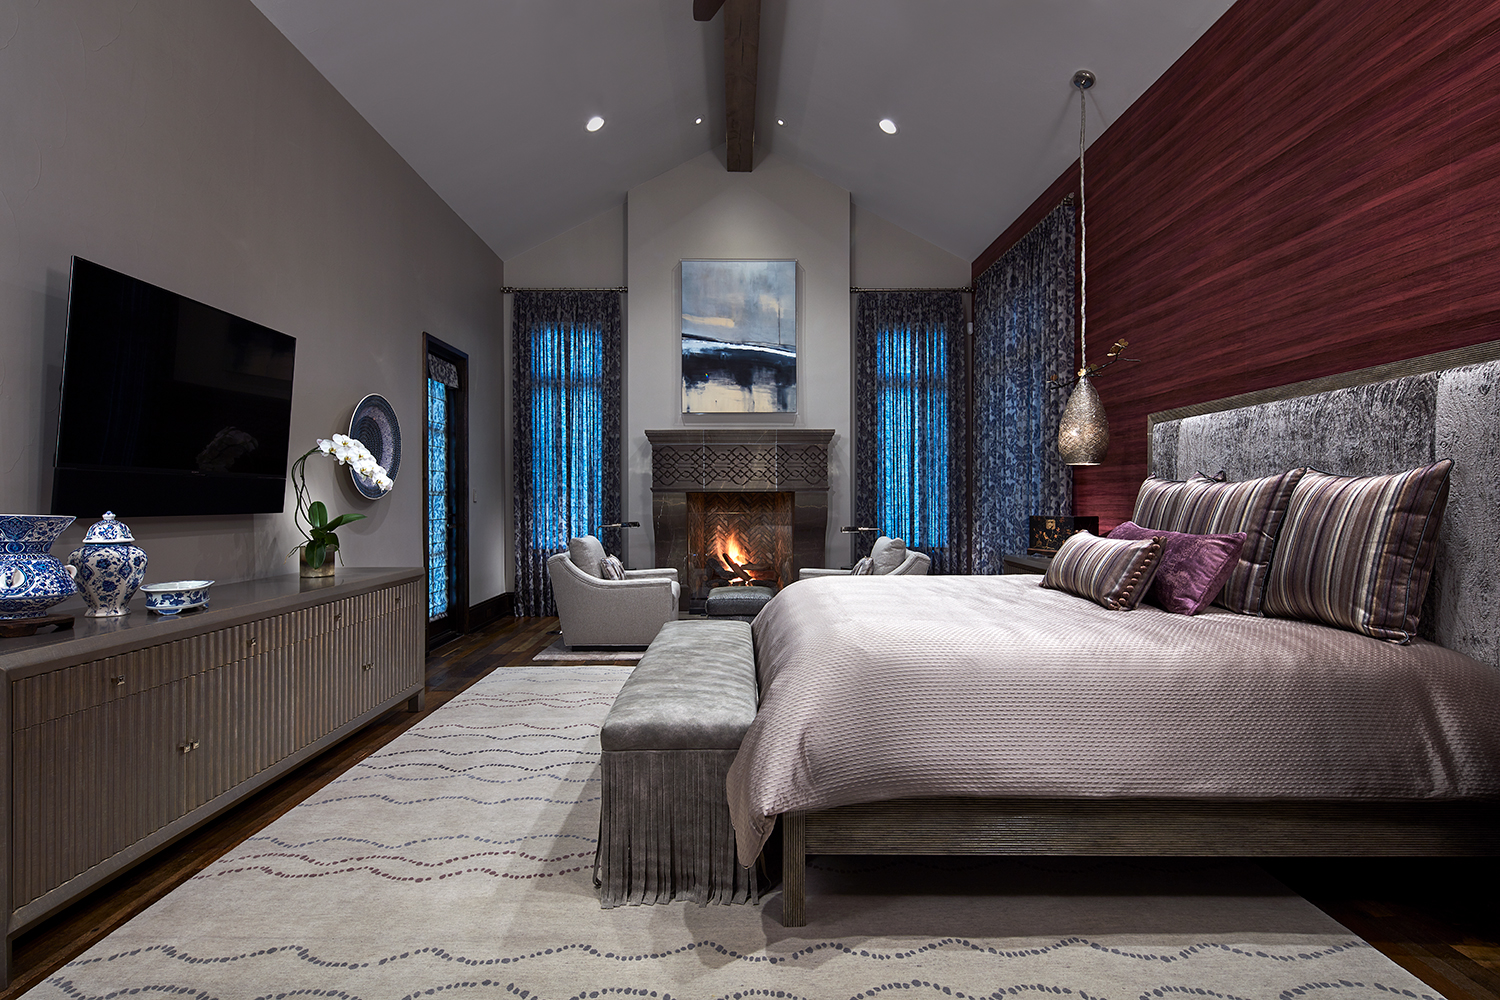 Spacious Master Bedroom with Fireplace in Sitting Area